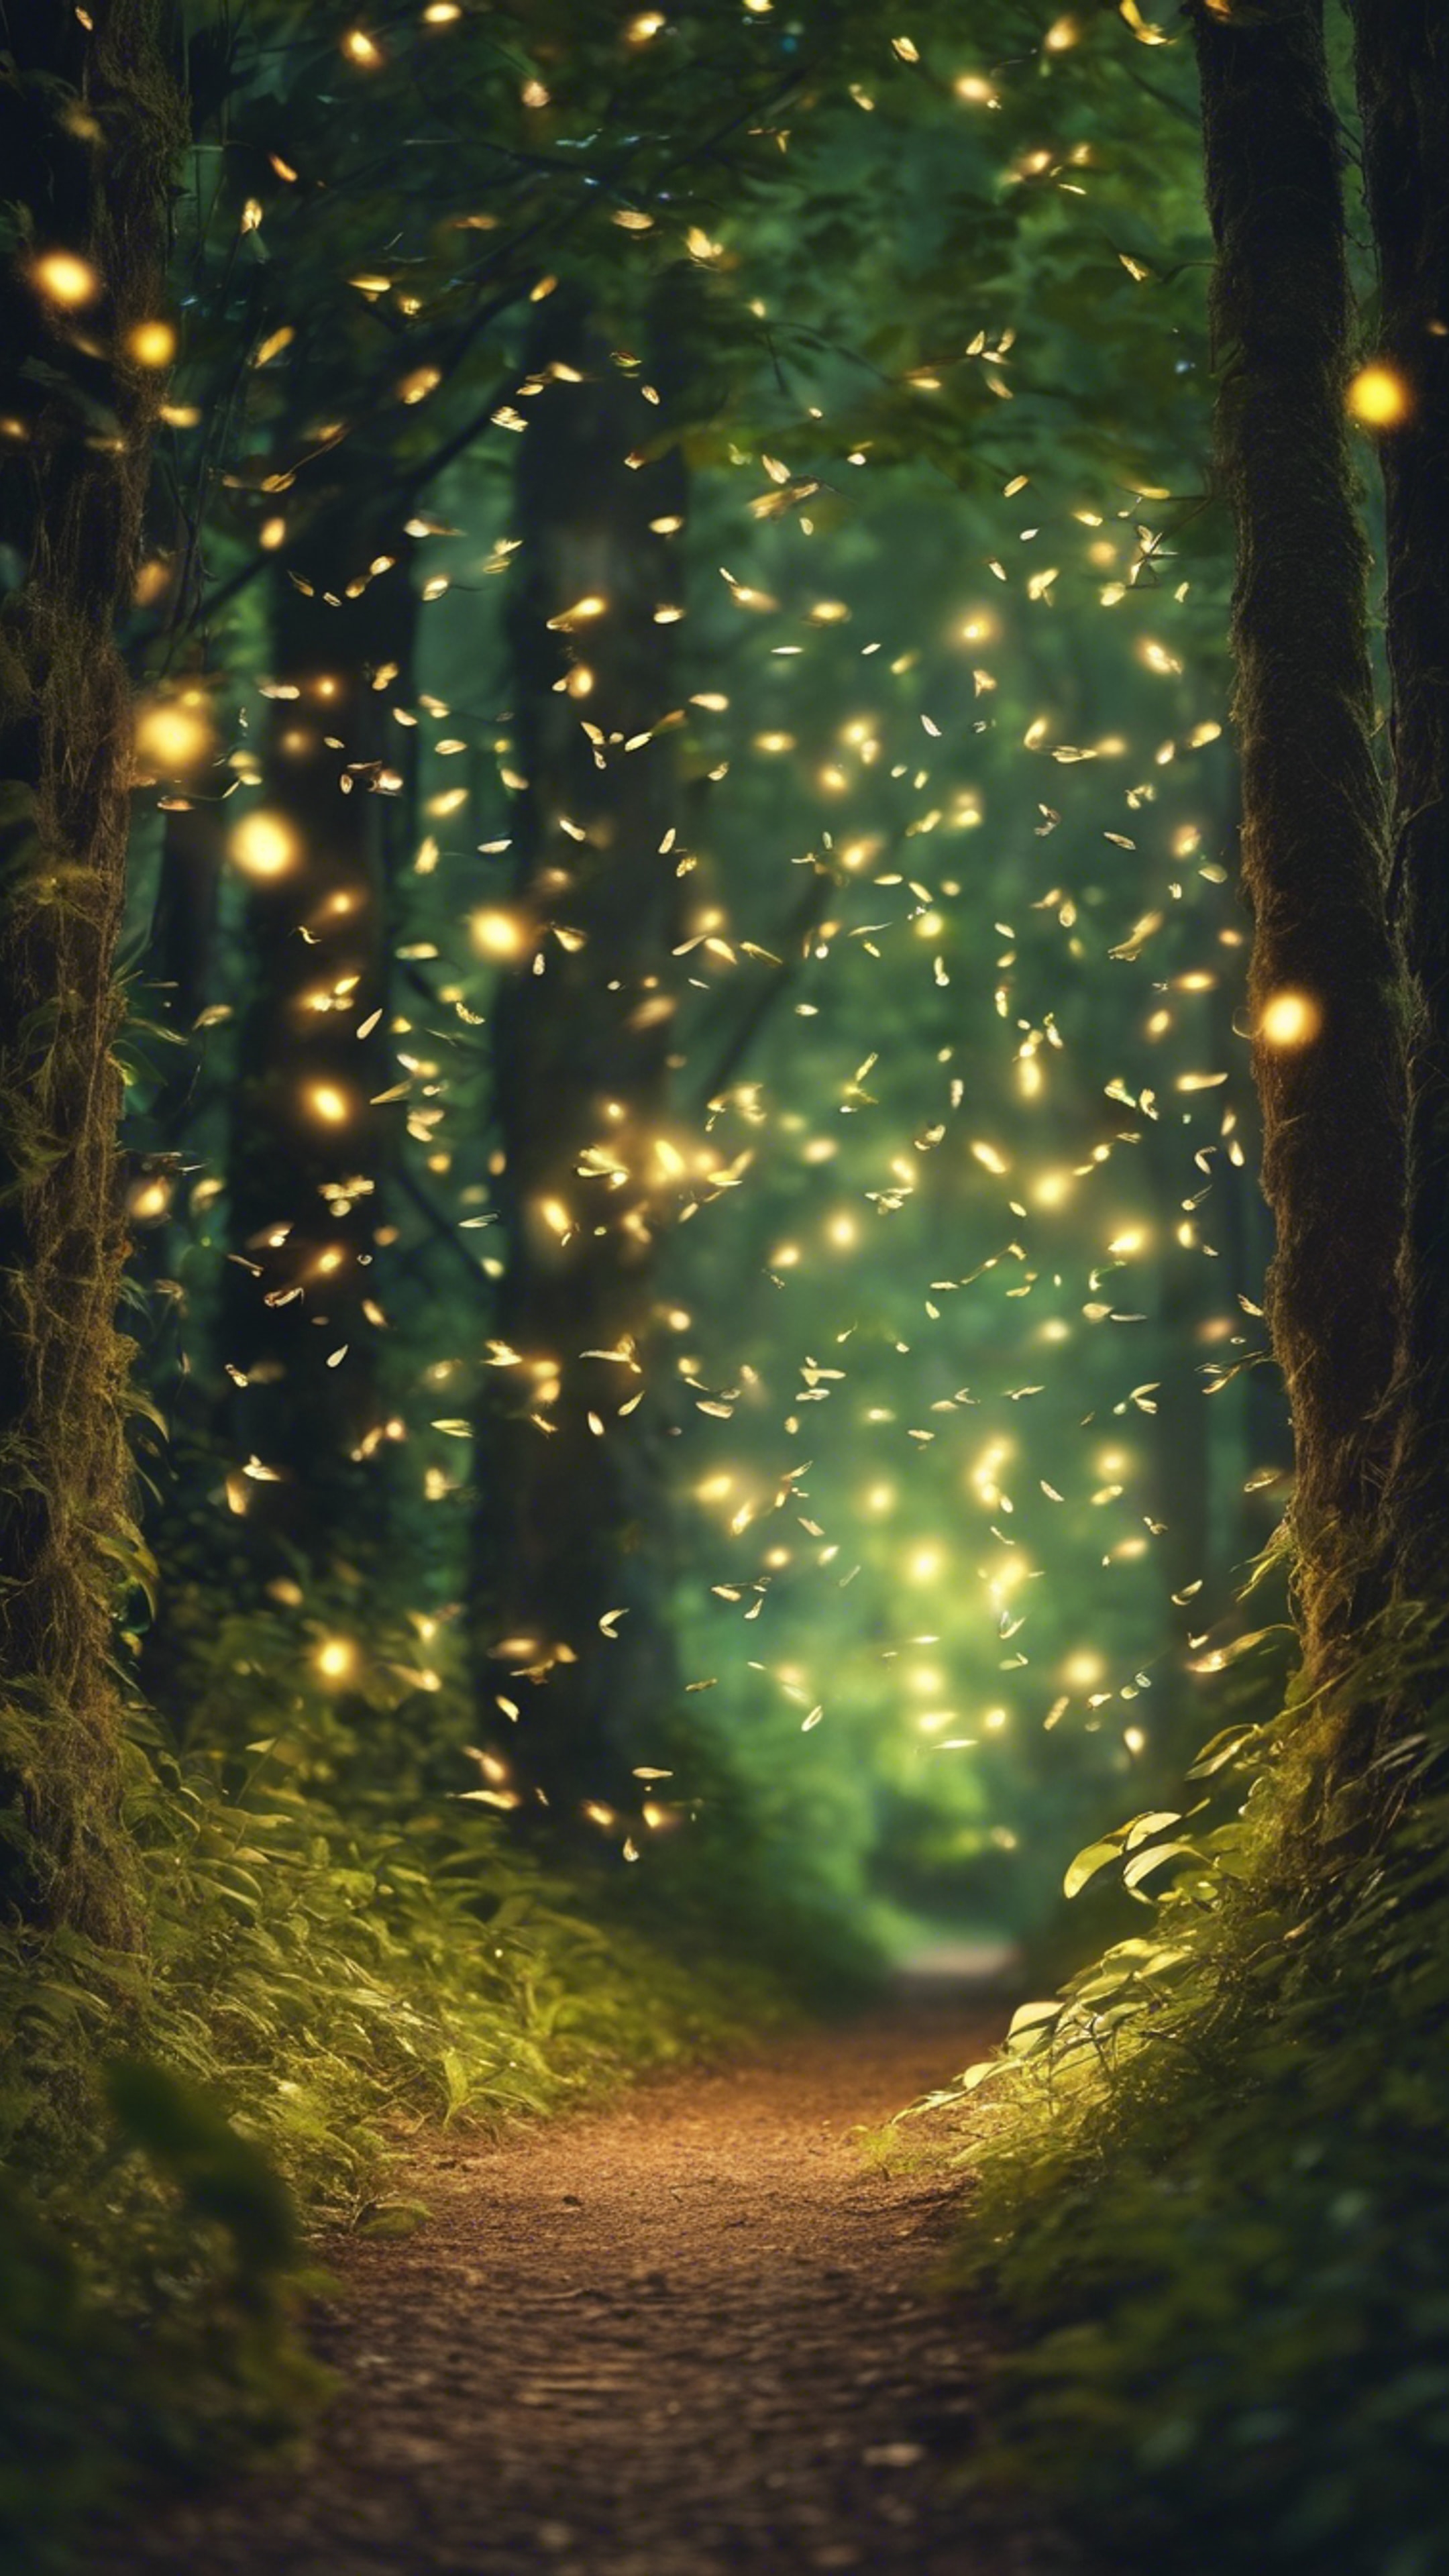 An enchanting forest path illuminated by the mystical glow of fireflies and the soft, natural light filtering through the overhead canopy of leaves. کاغذ دیواری[4b115bf911ac49cd855d]